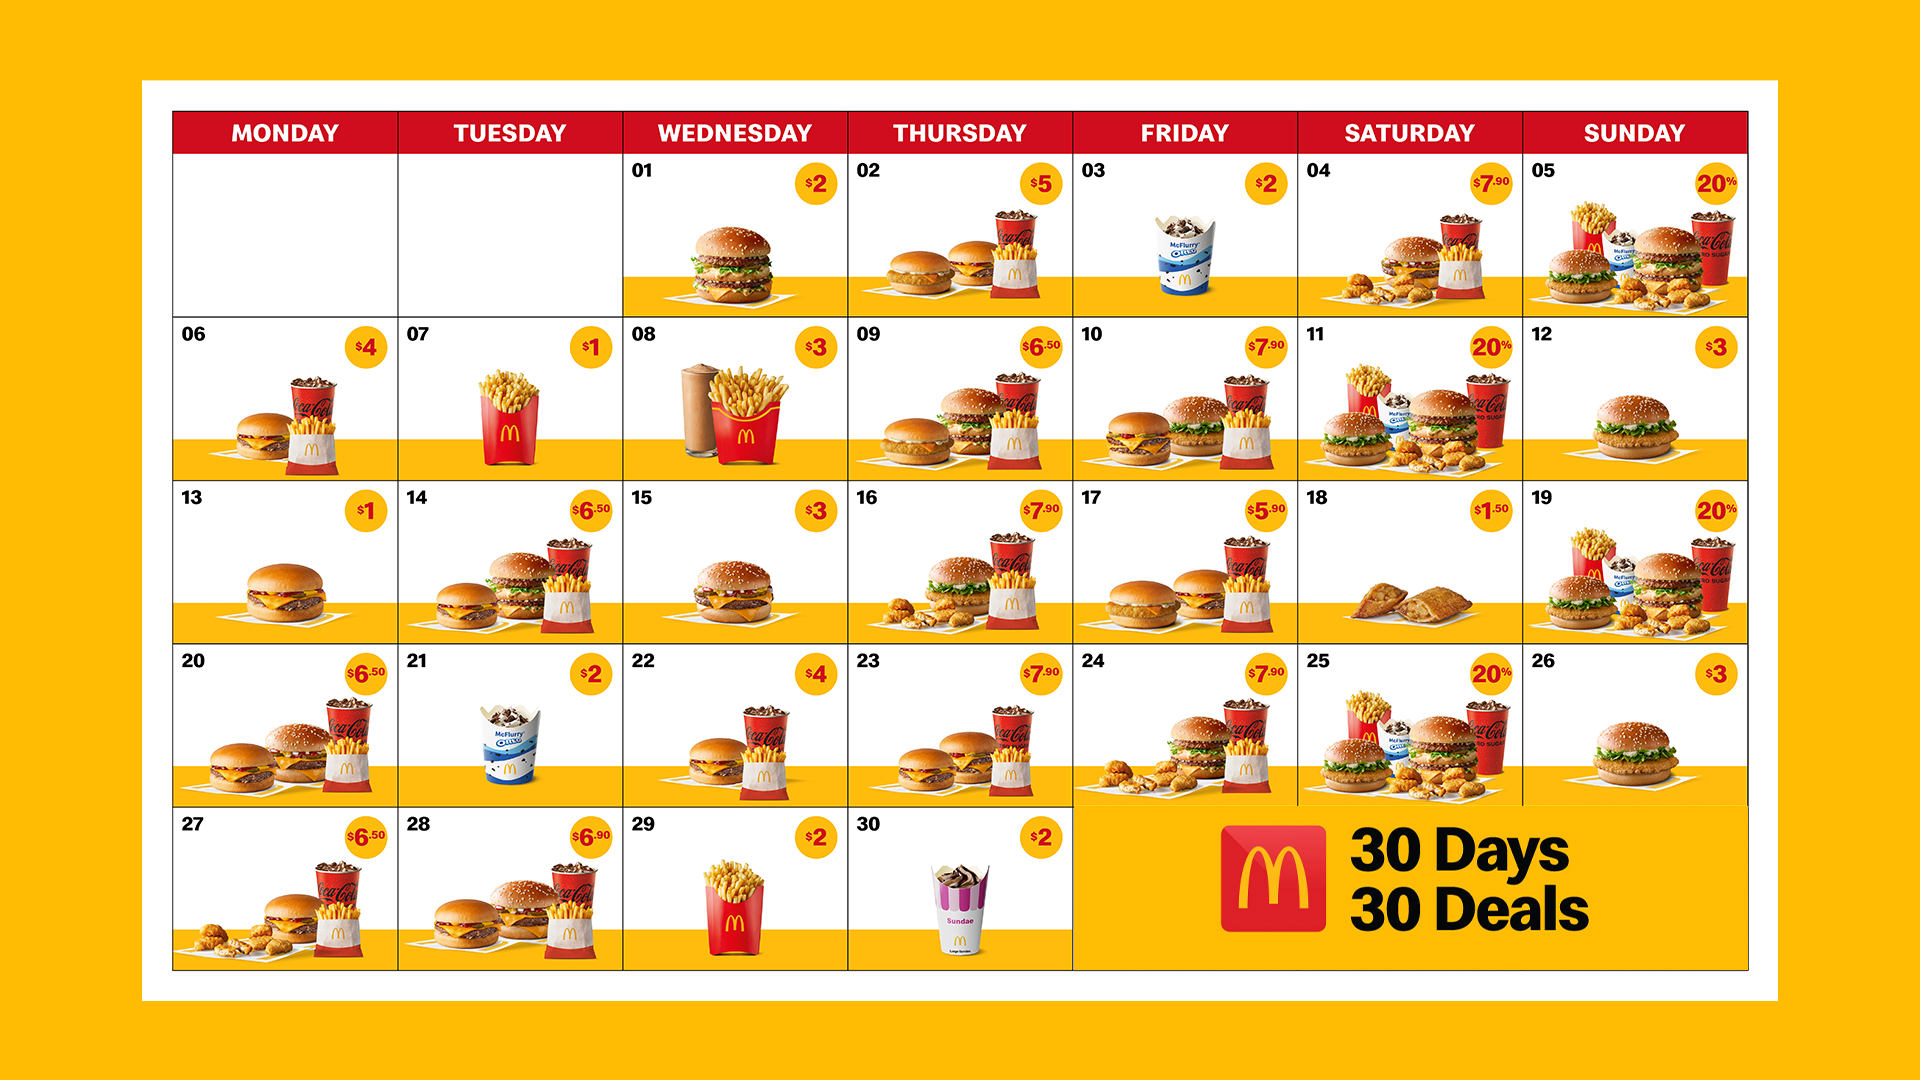 Macca’s 30 Days Of Deals Is Back! Check Out The Full List Of Deals!